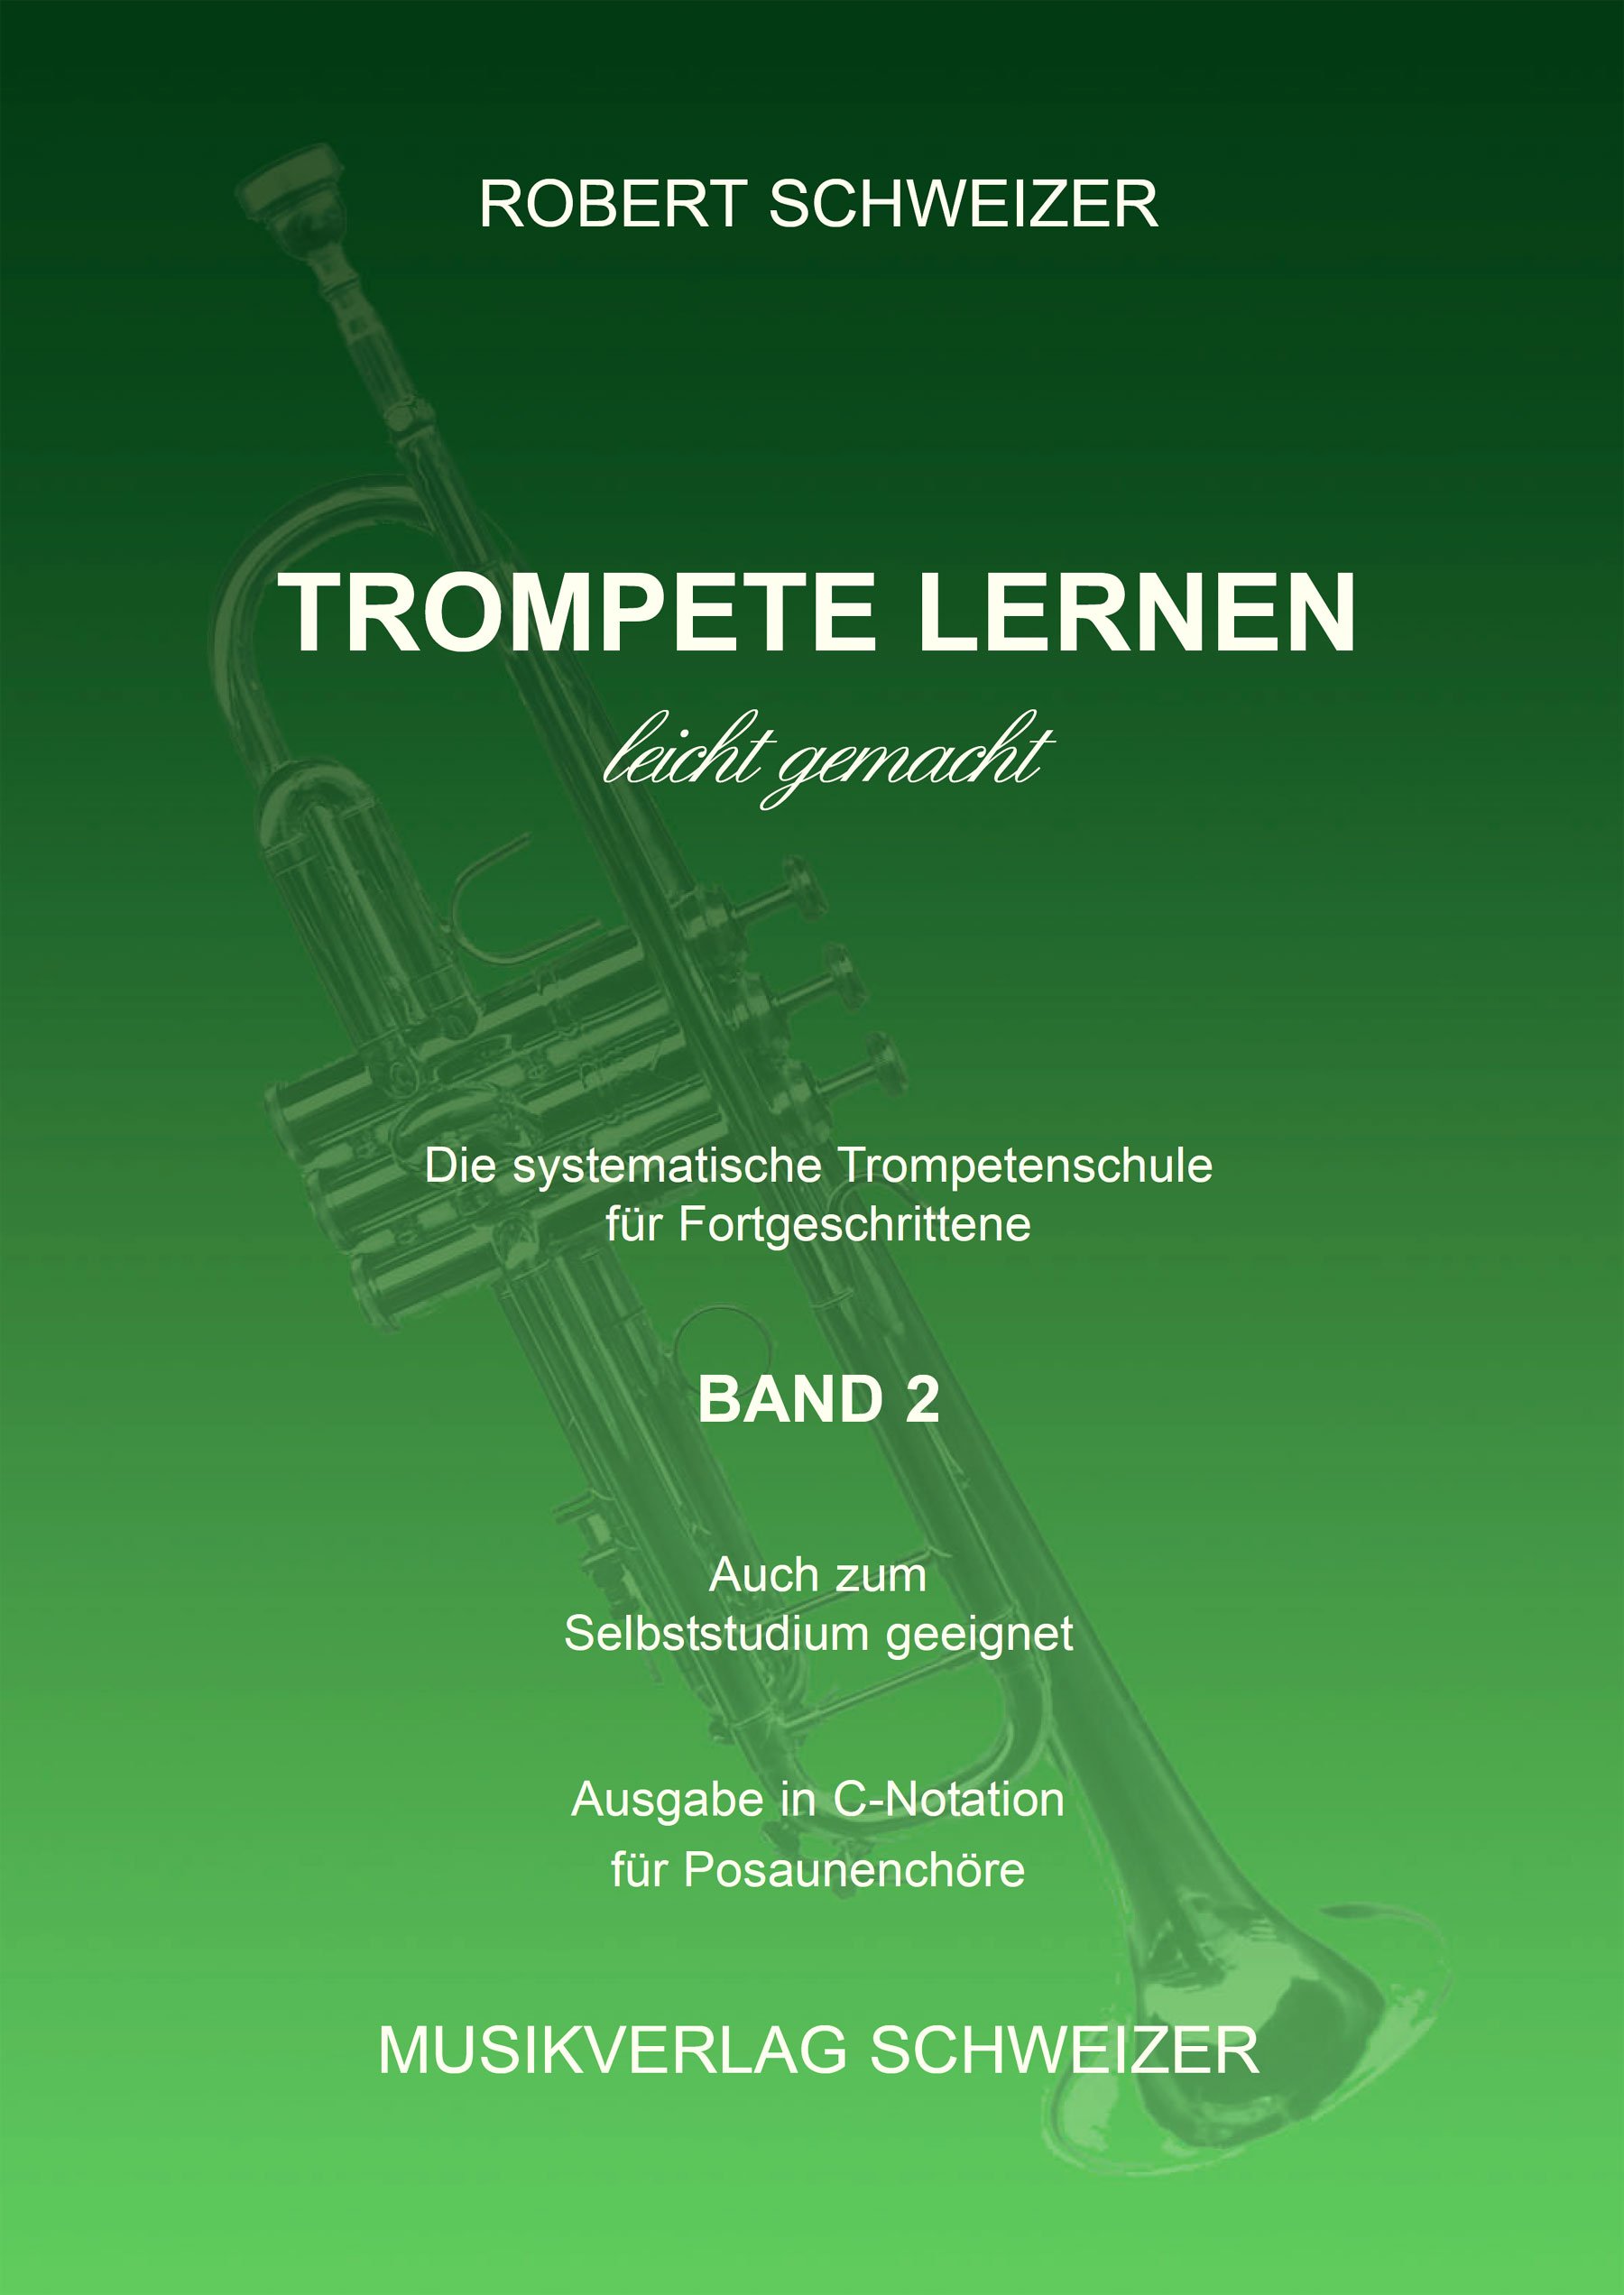 Trompete lernen BAND 2 C-Notation